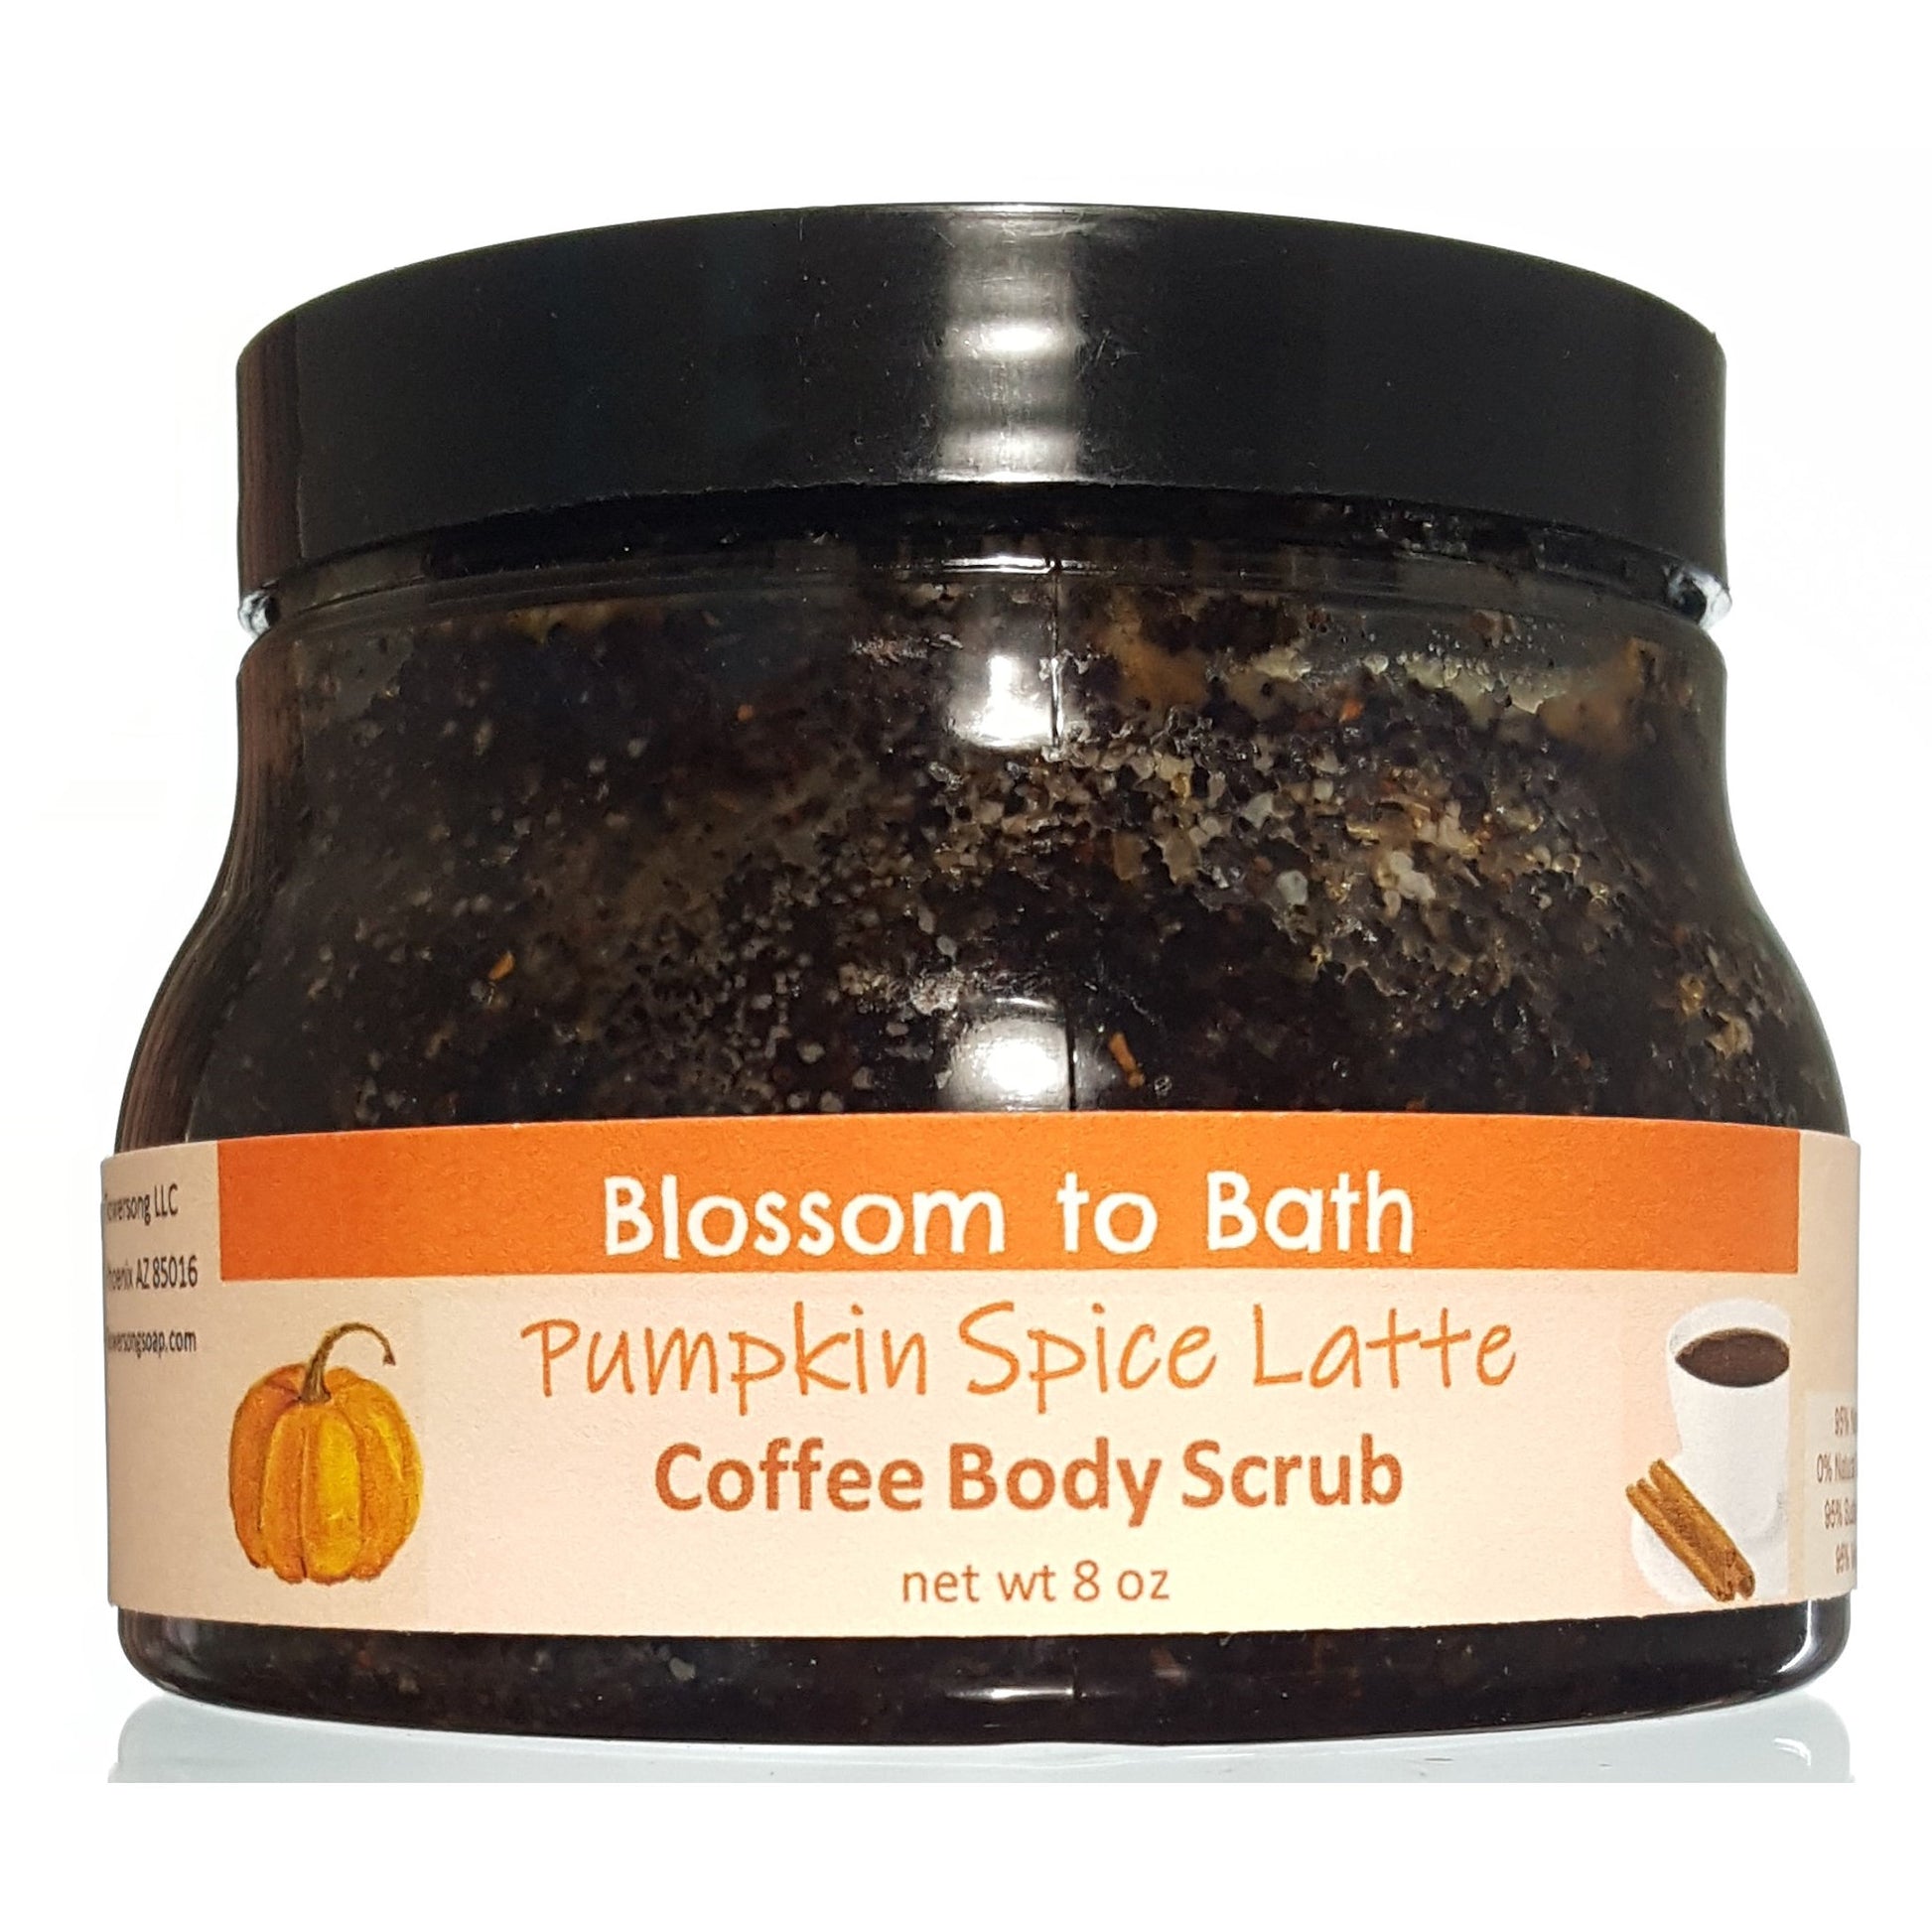 Buy Blossom to Bath Pumpkin Spice Latte Coffee Body Scrub from Flowersong Soap Studio.  Polish skin to a refreshed natural glow while enjoying your favorite mouth-watering gourmet coffee aroma  Deep vanilla and lightly fruited spice blend seamlessly with rich coffee.